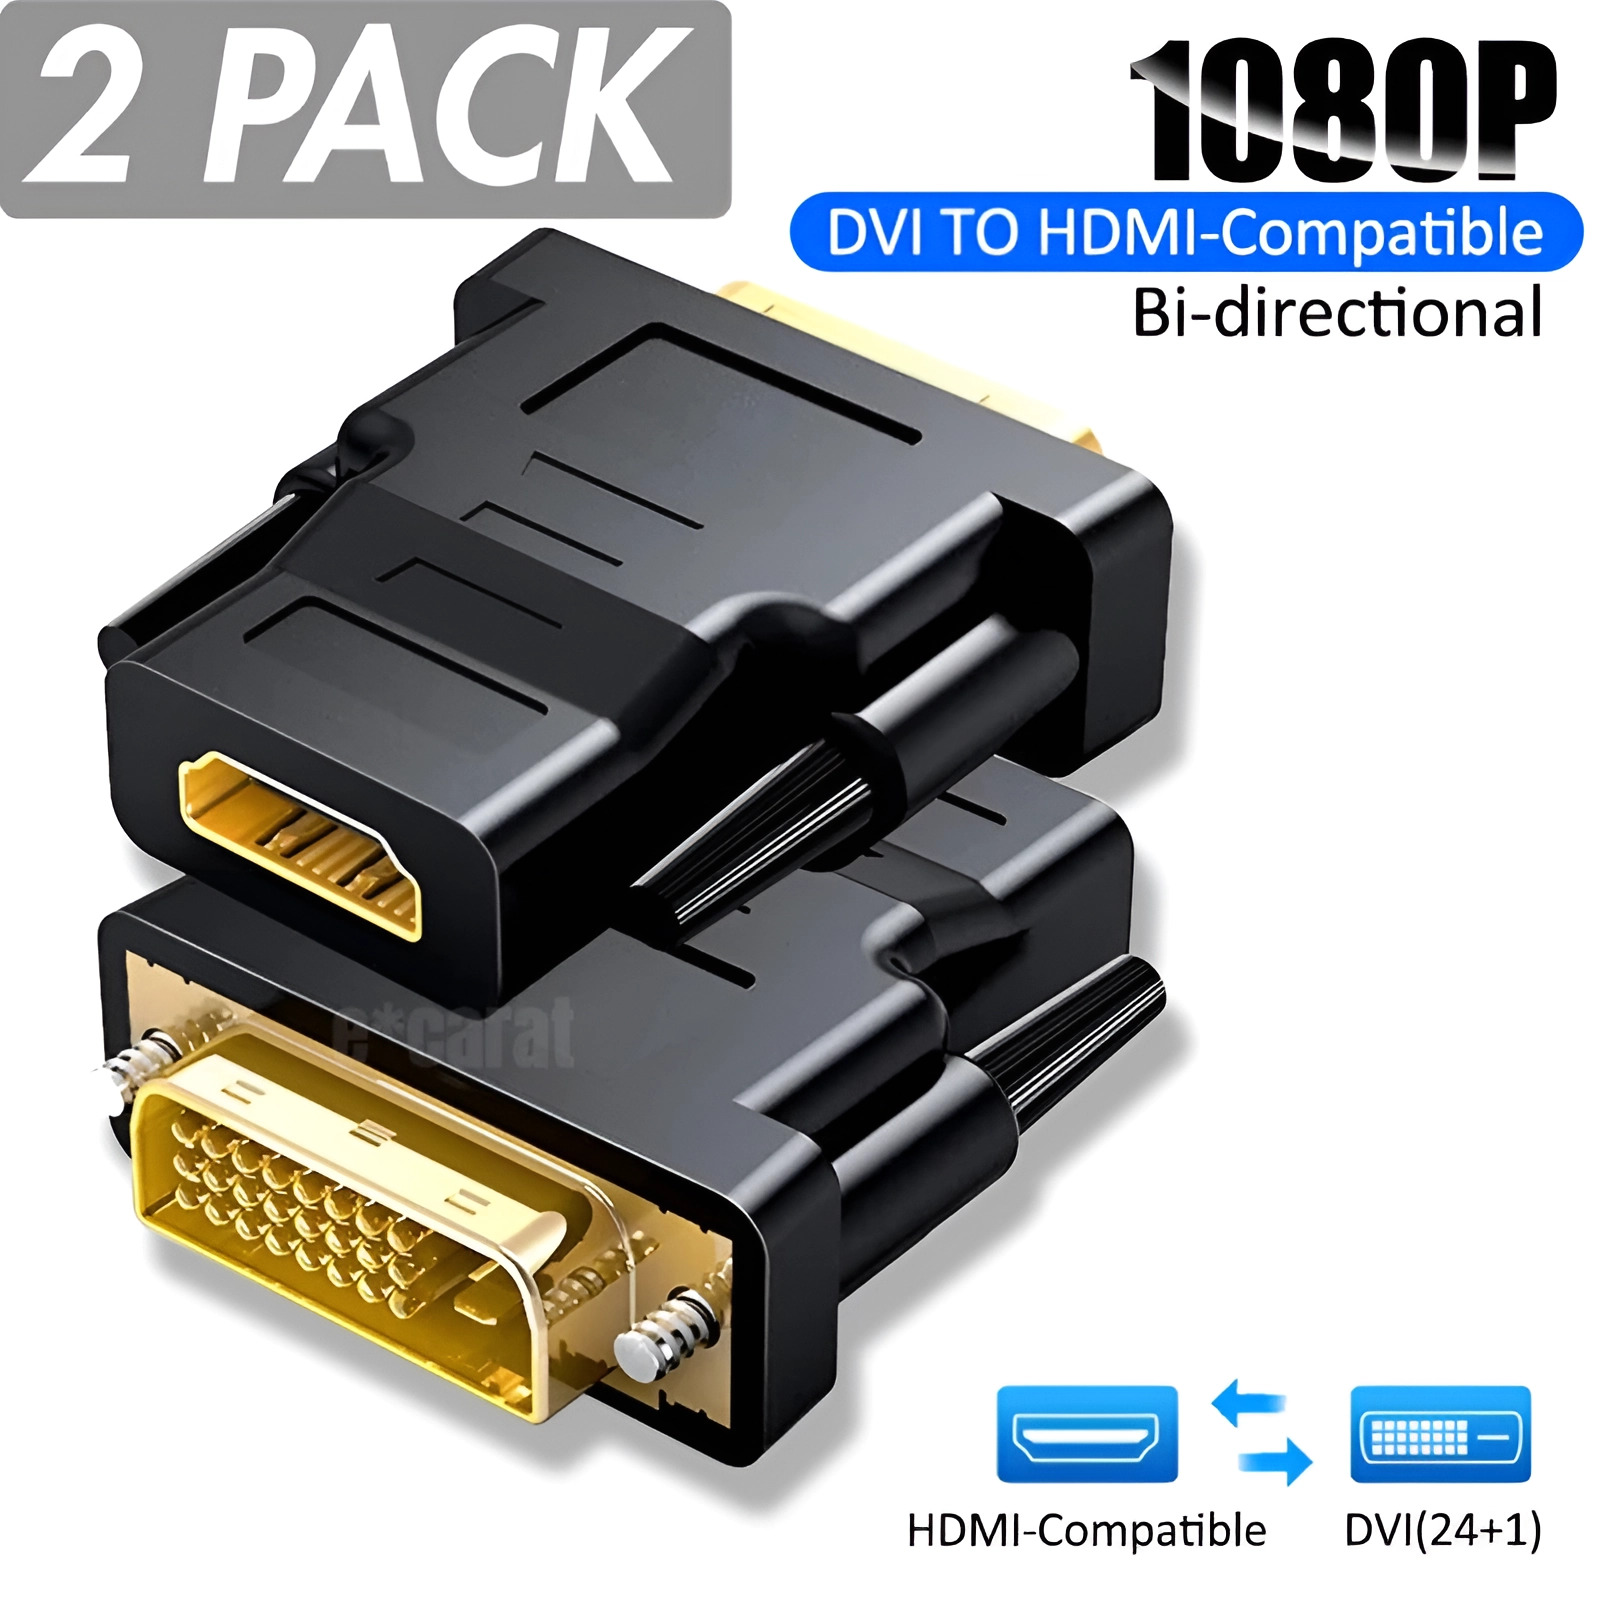 2-Pack DVI-D Male to HDMI Female Adapter for HDTV PC Monitor Projector Blu-ray